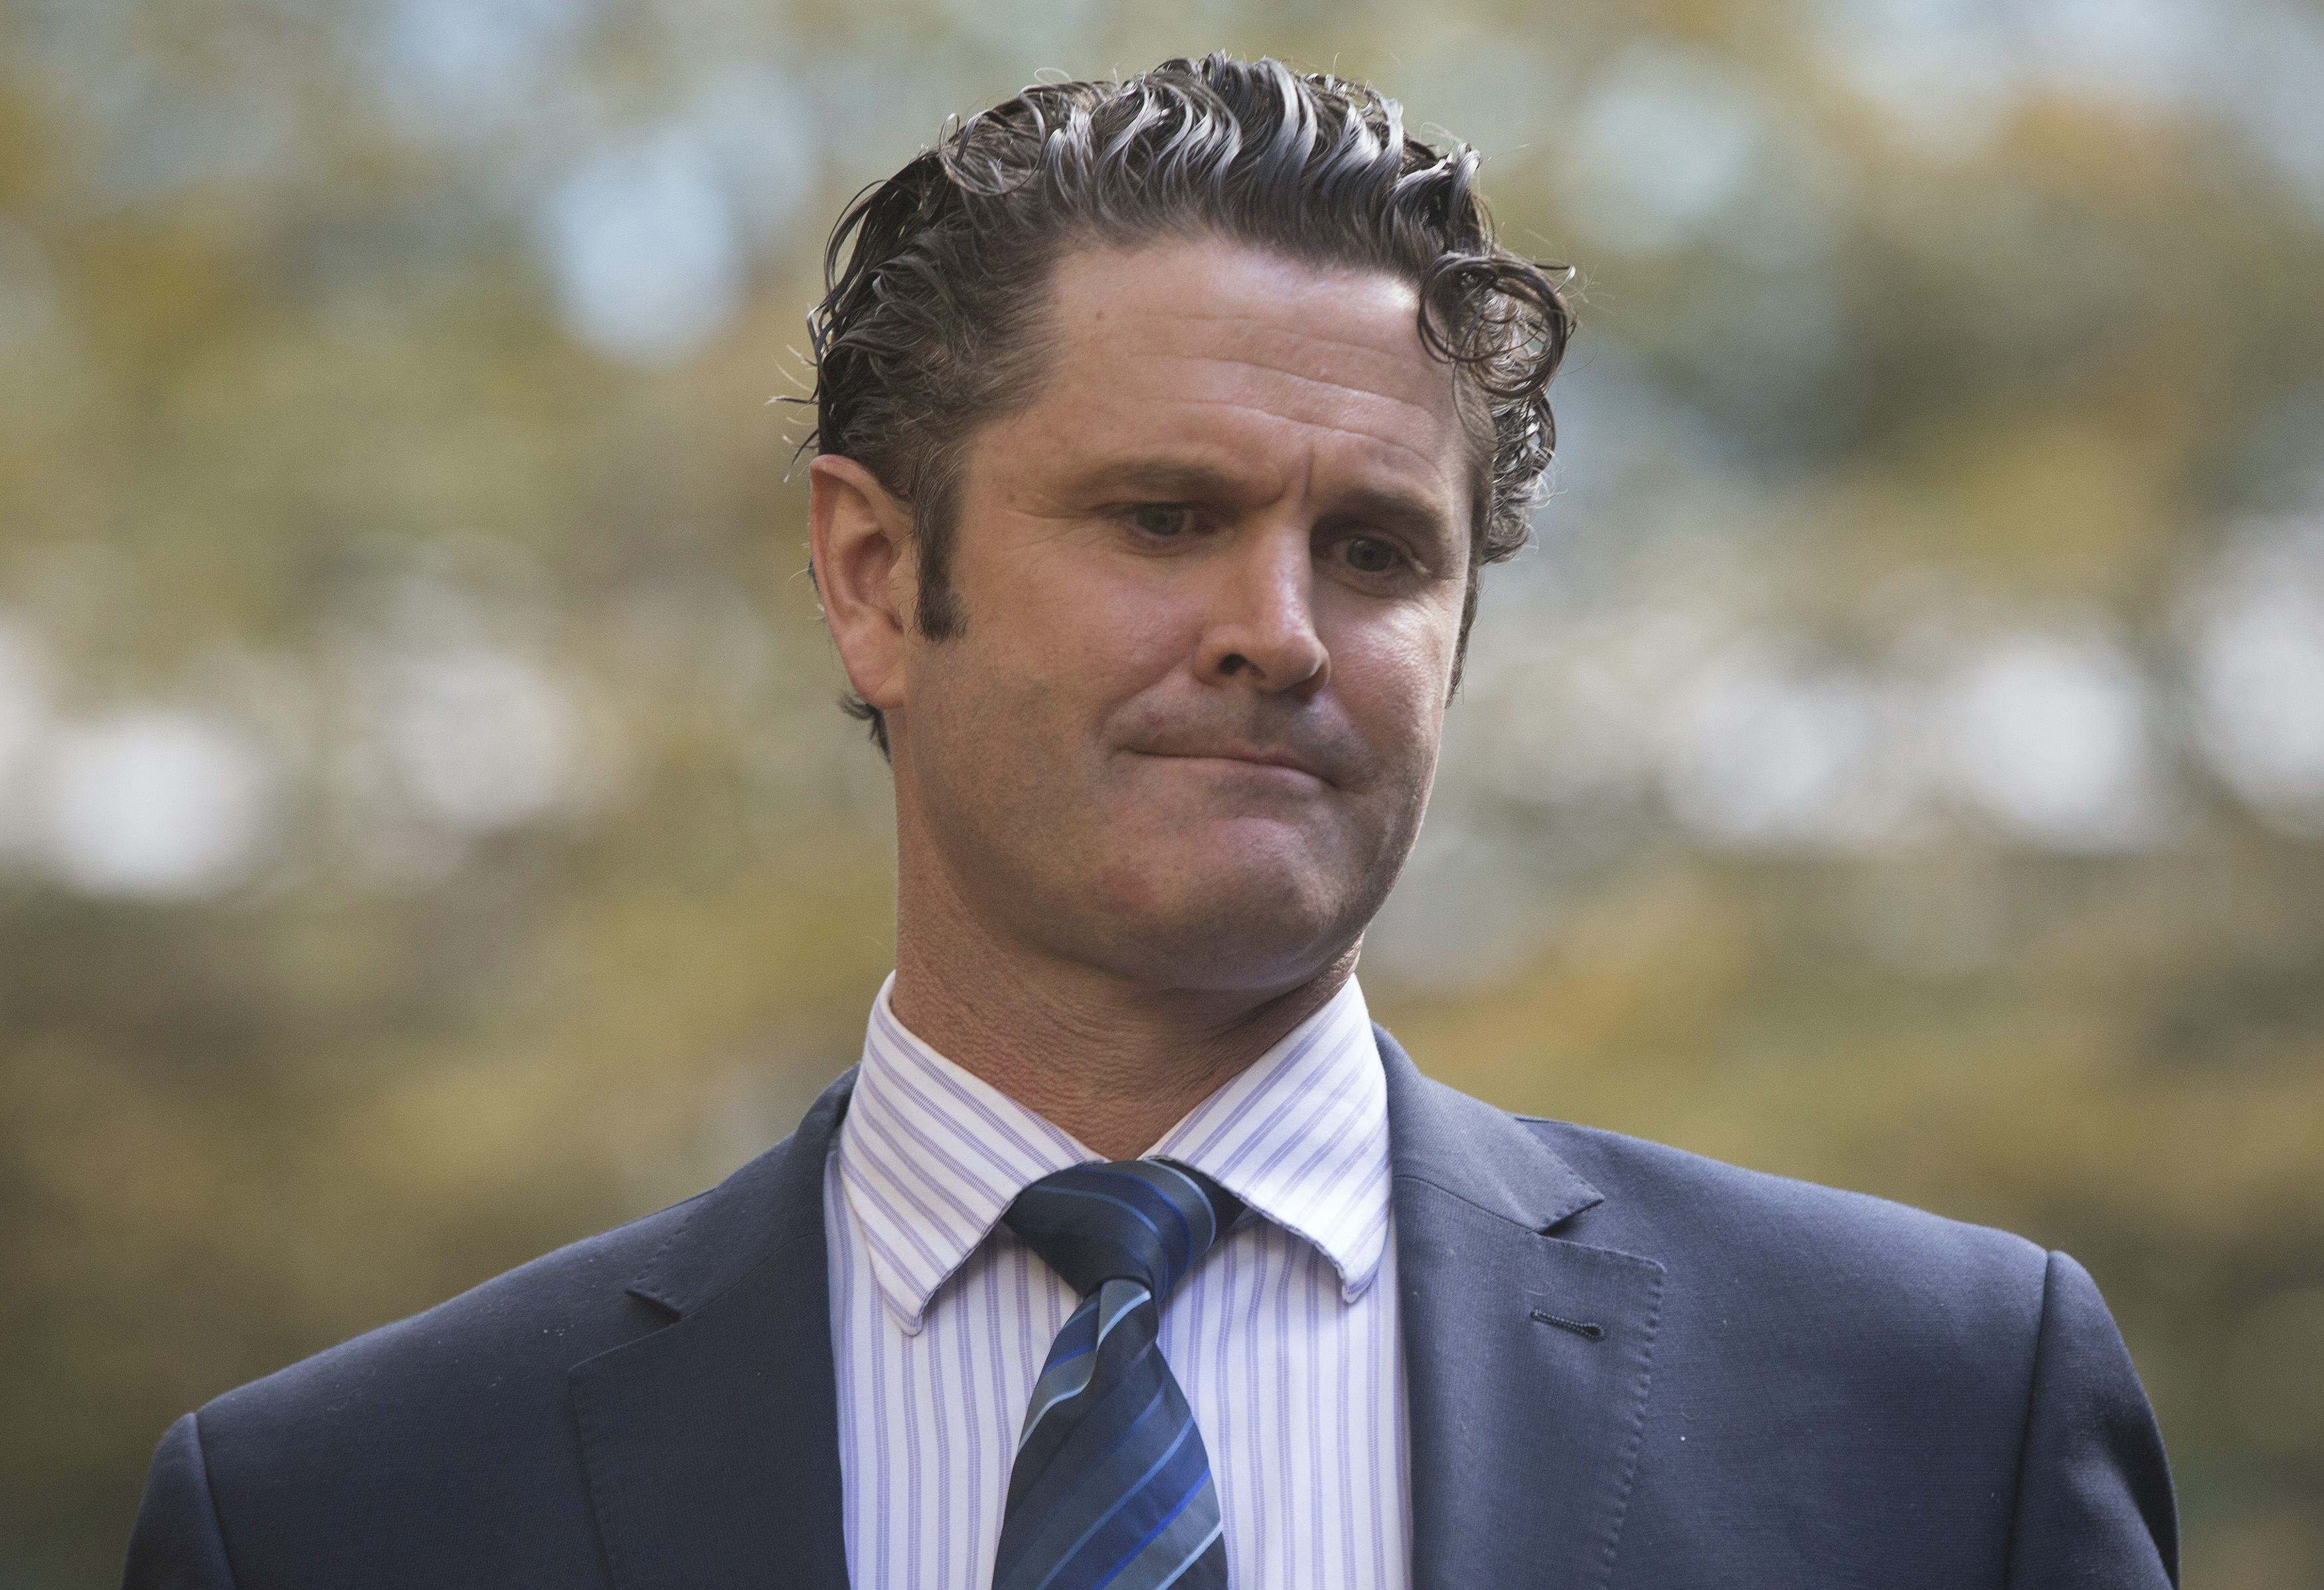 Former New Zealand cricket captain Chris Cairns leaves Southwark crown court in London October 16, 2014. Cairns appeared at court on Thursday charged with perjury relating to libel action against Lalit Modi in 2012. REUTERS/Neil Hall